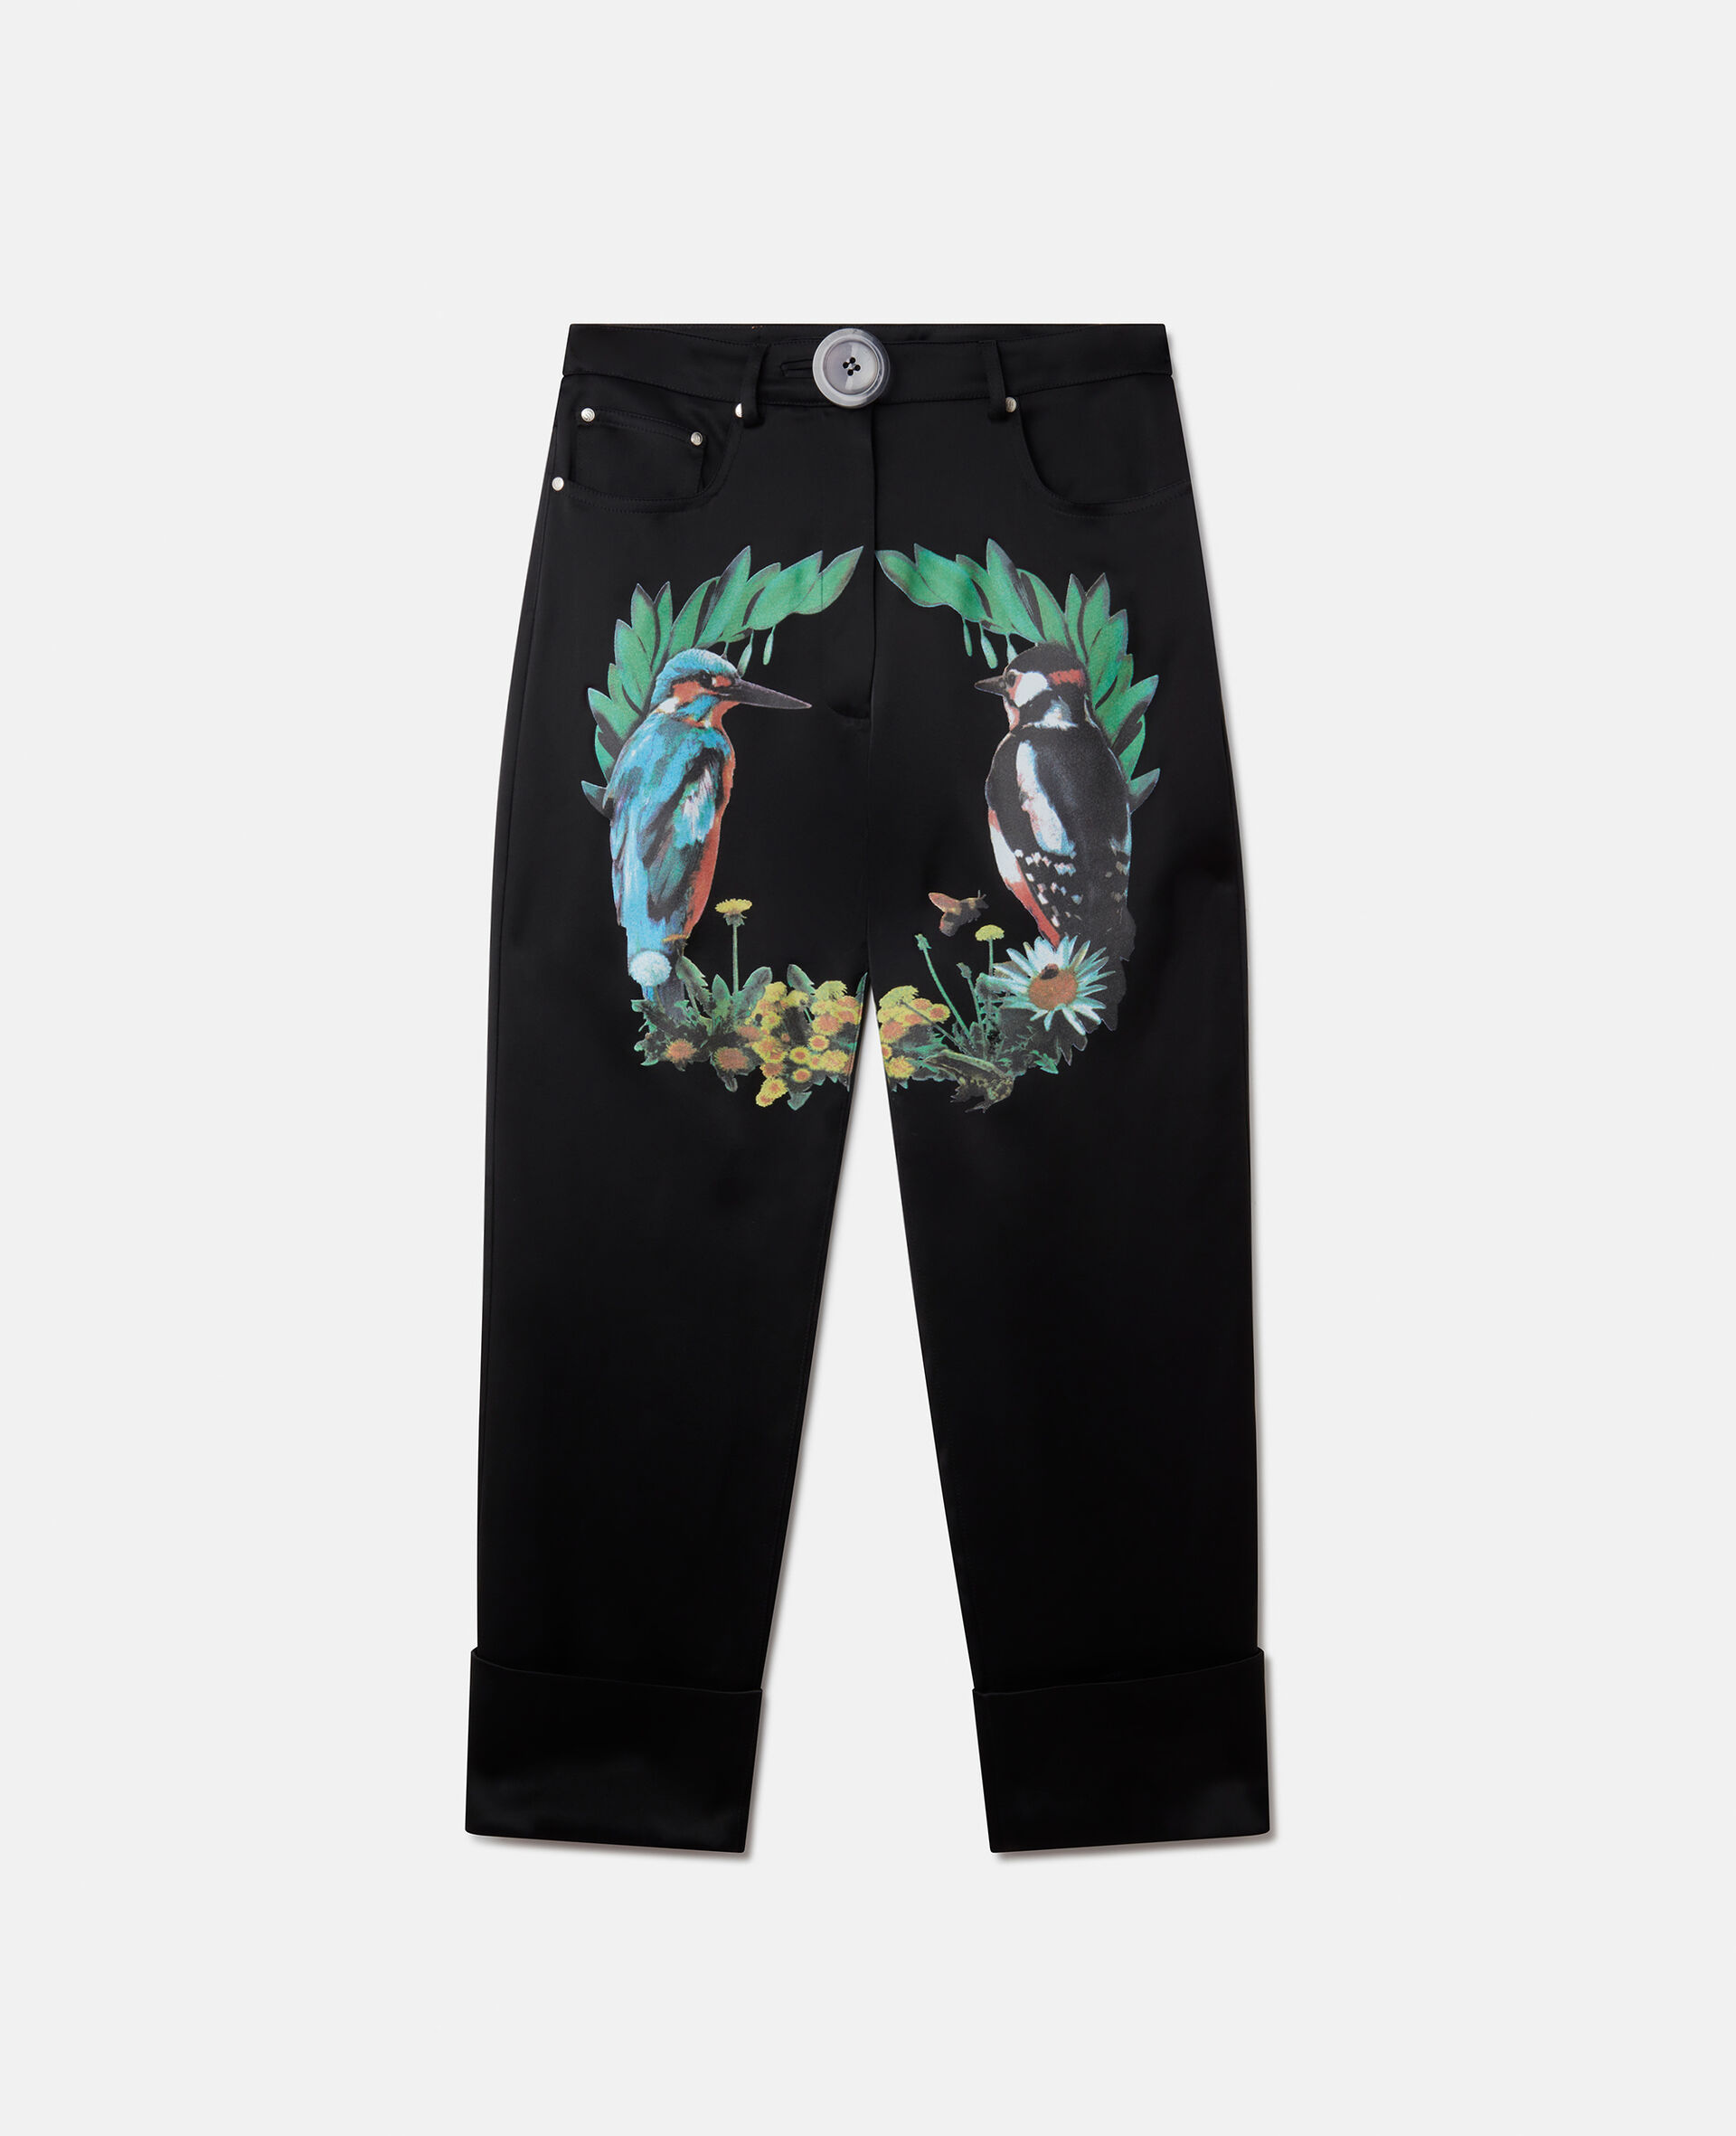 Bird Crest Print Satin Tailored Trousers-Black-large image number 0